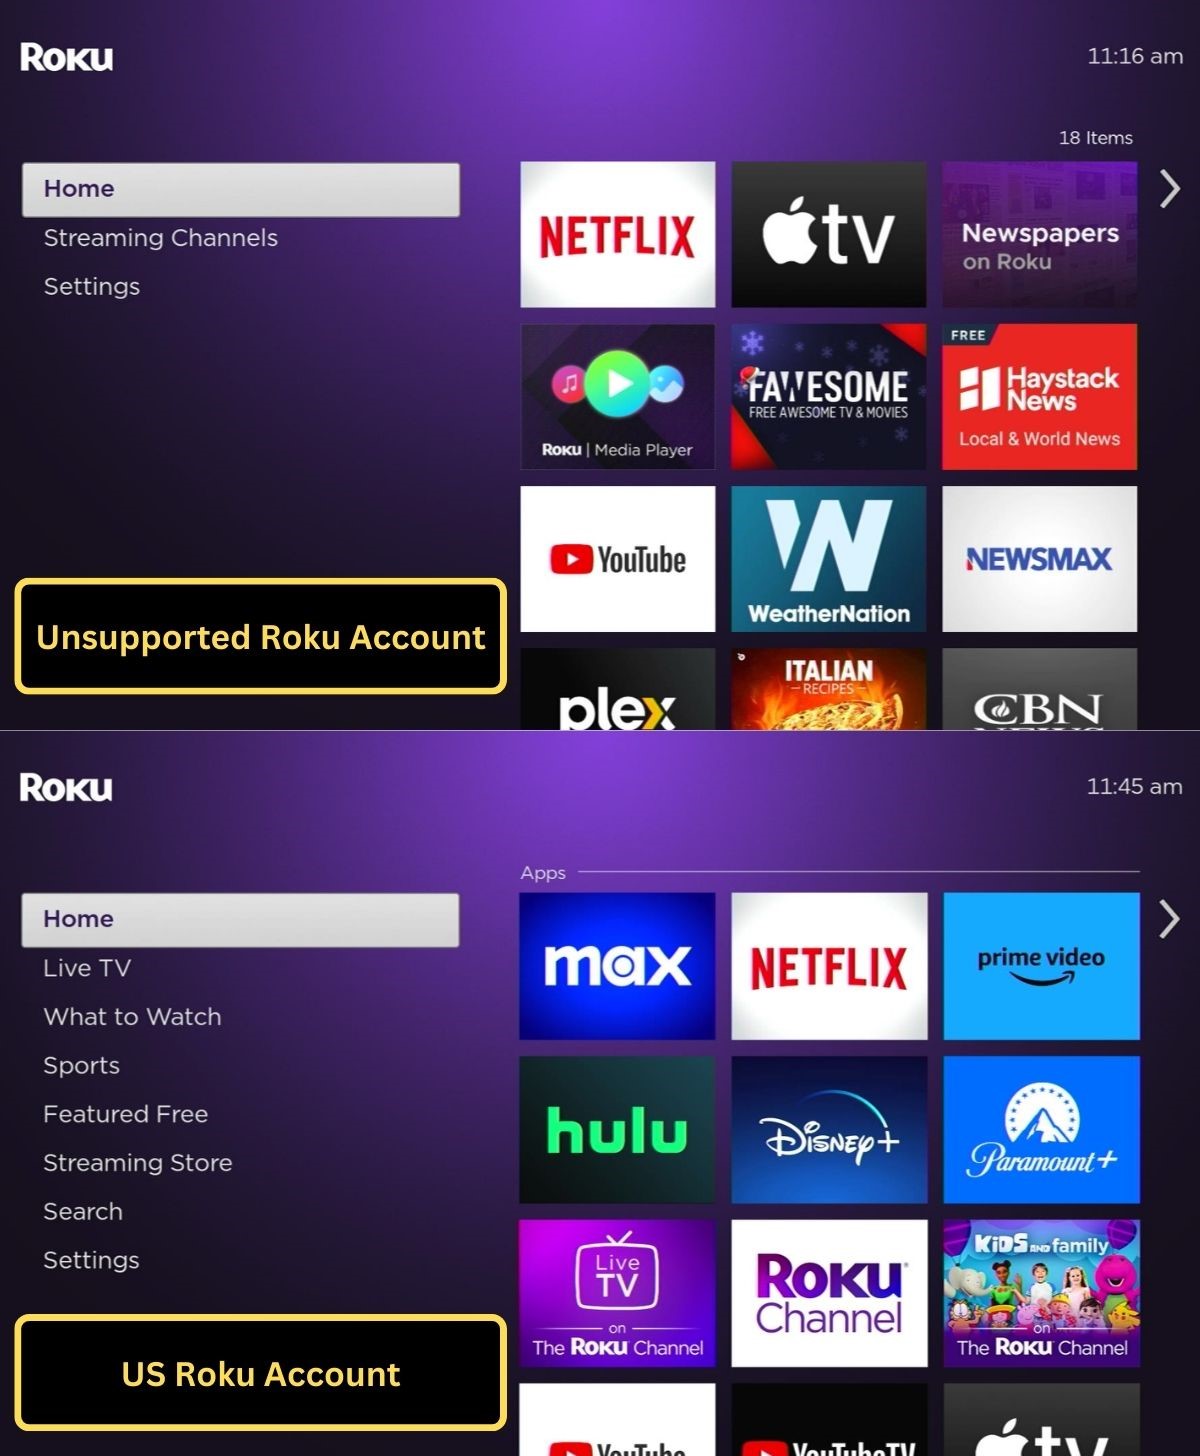 roku screens when using unsupported and us accounts